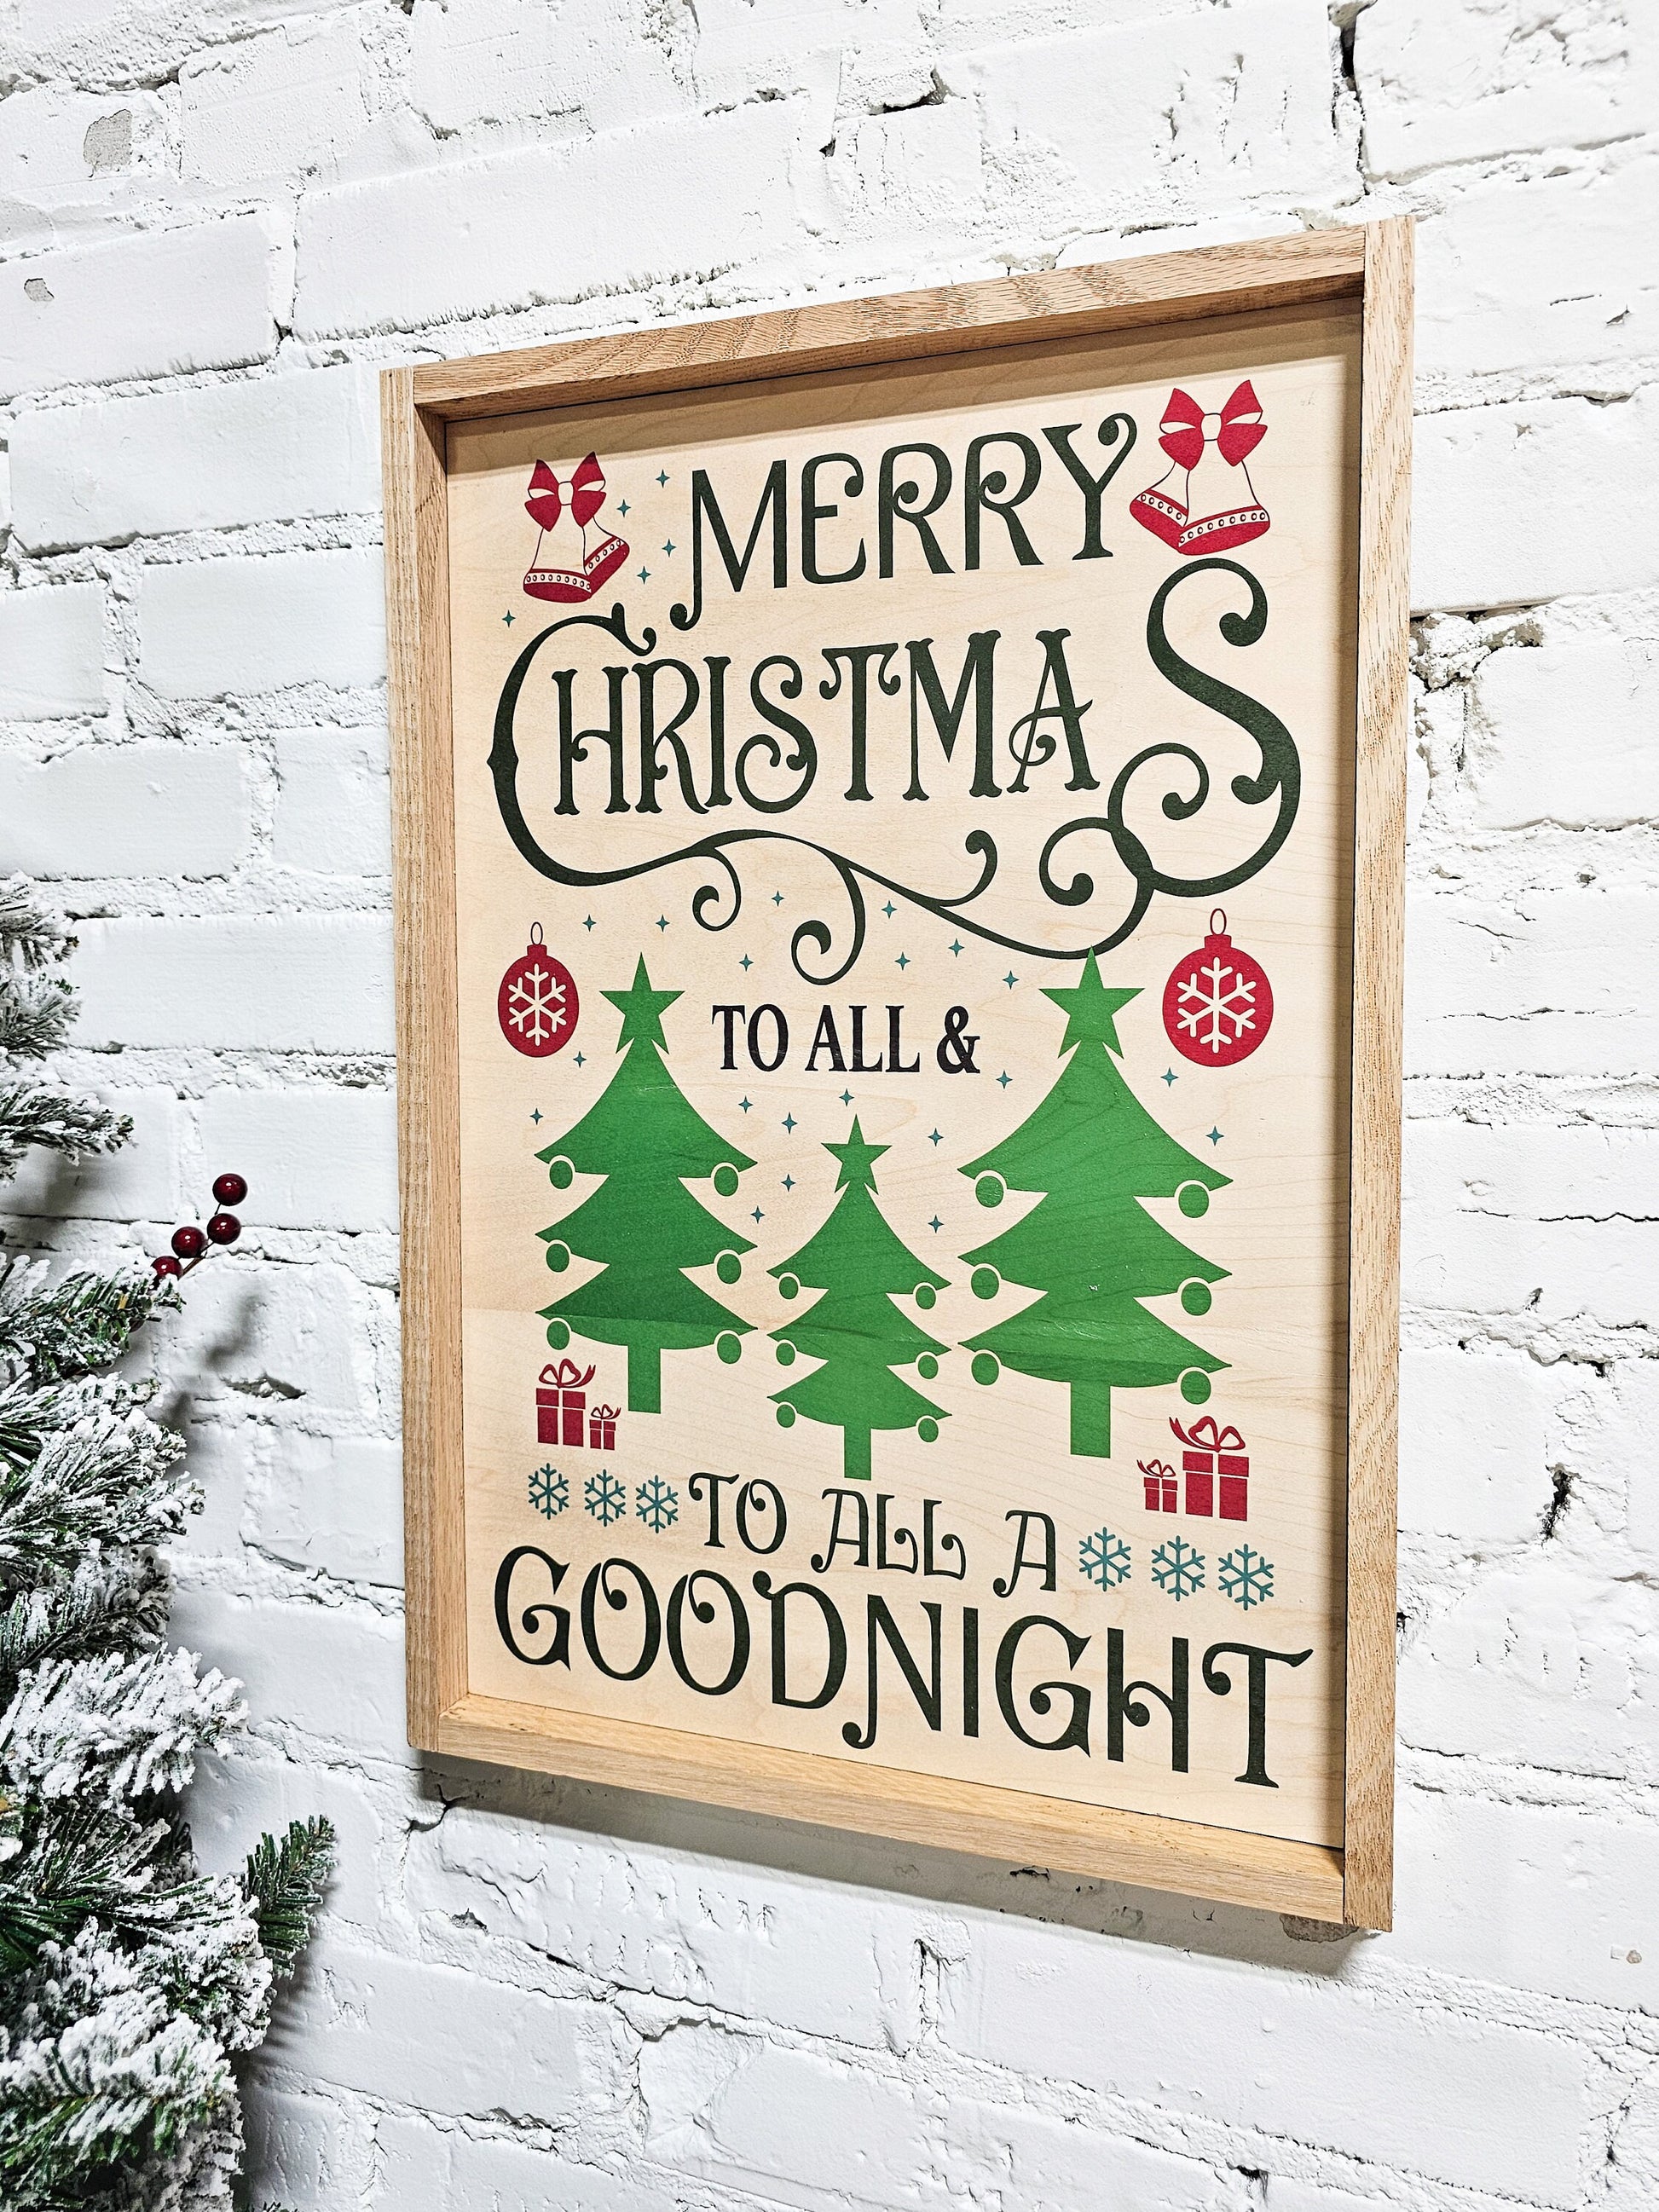 merry christmas to all and to all a goodnight holiday wooden sign wall decor hanging